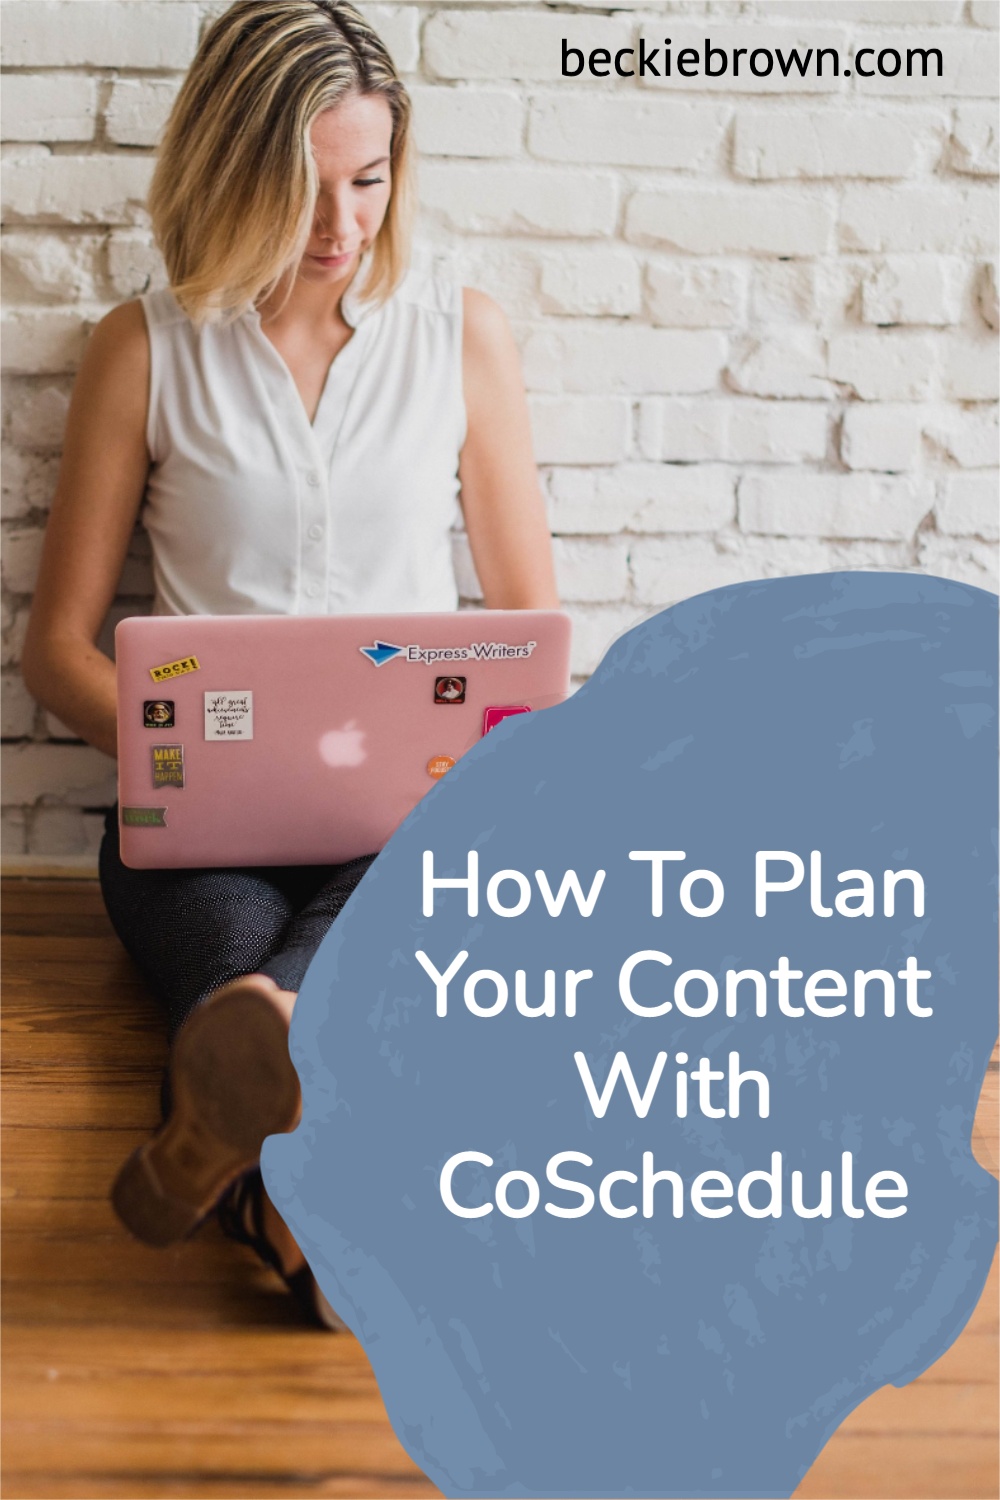 Learn how to plan your content with CoSchedule's Marketing Calendar